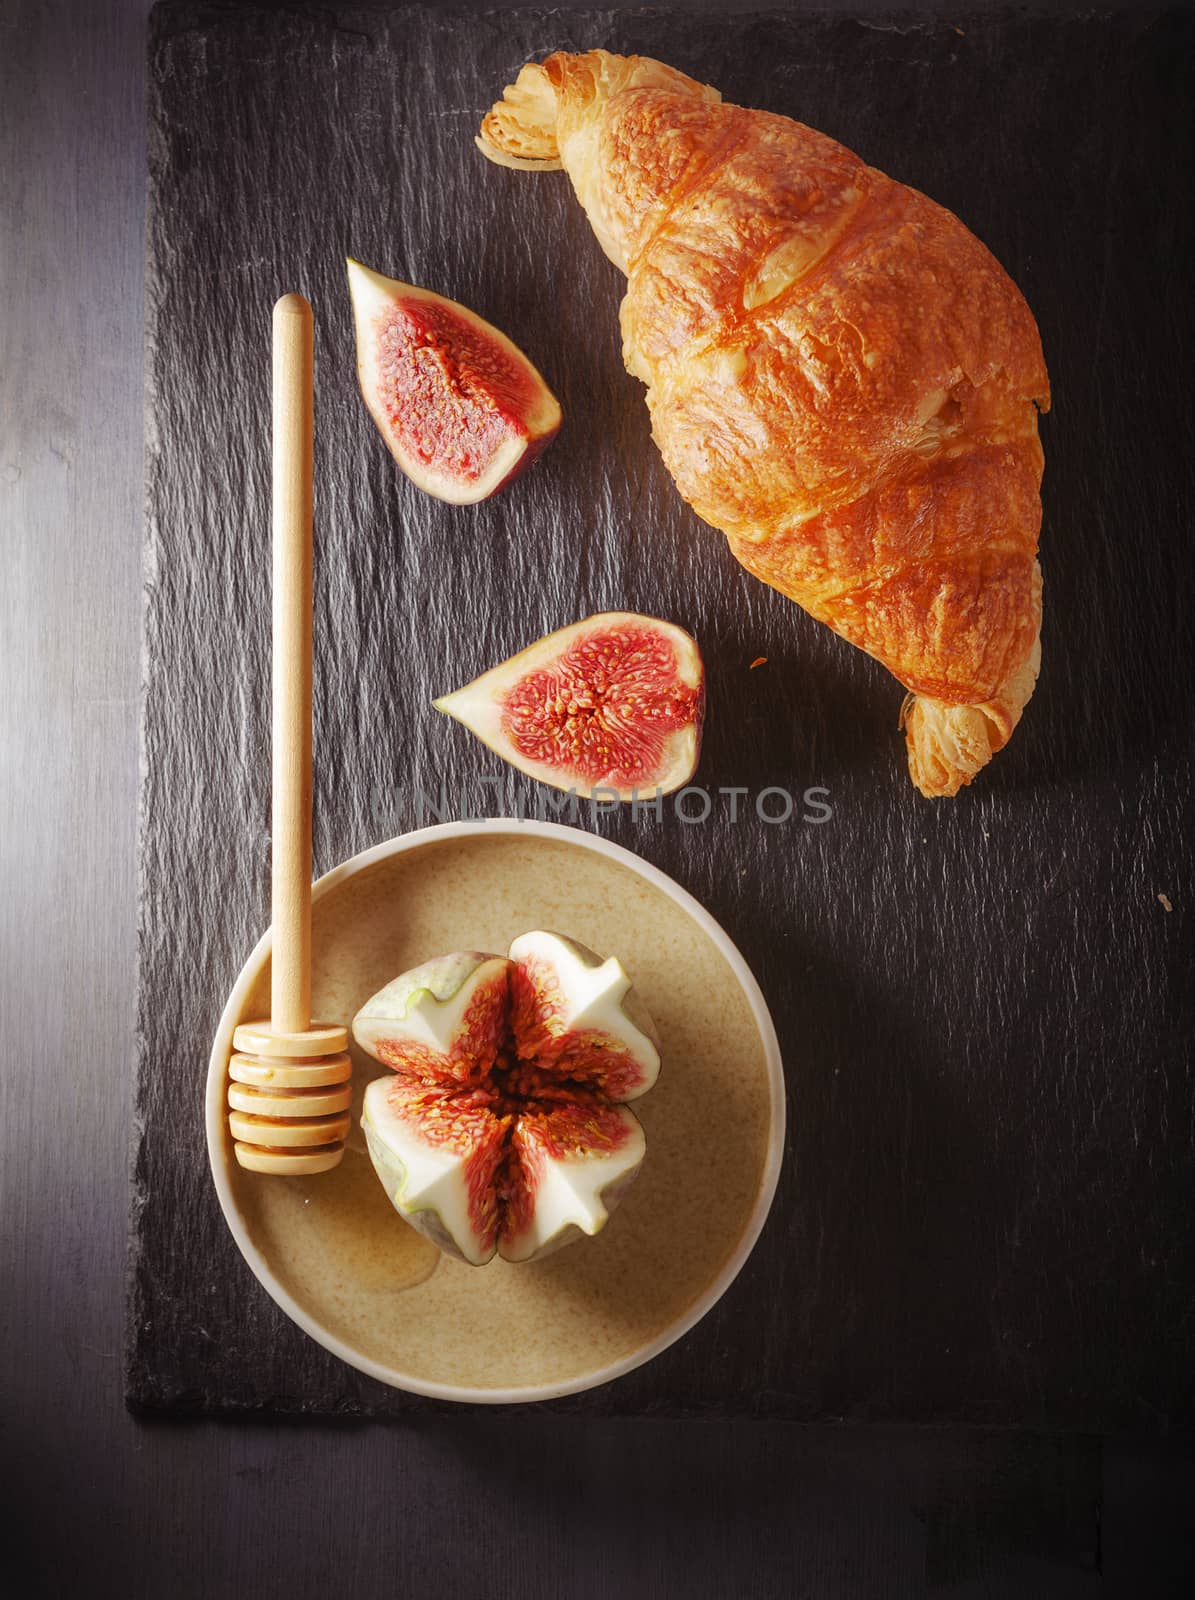 Croissant and figs on a stone plate.